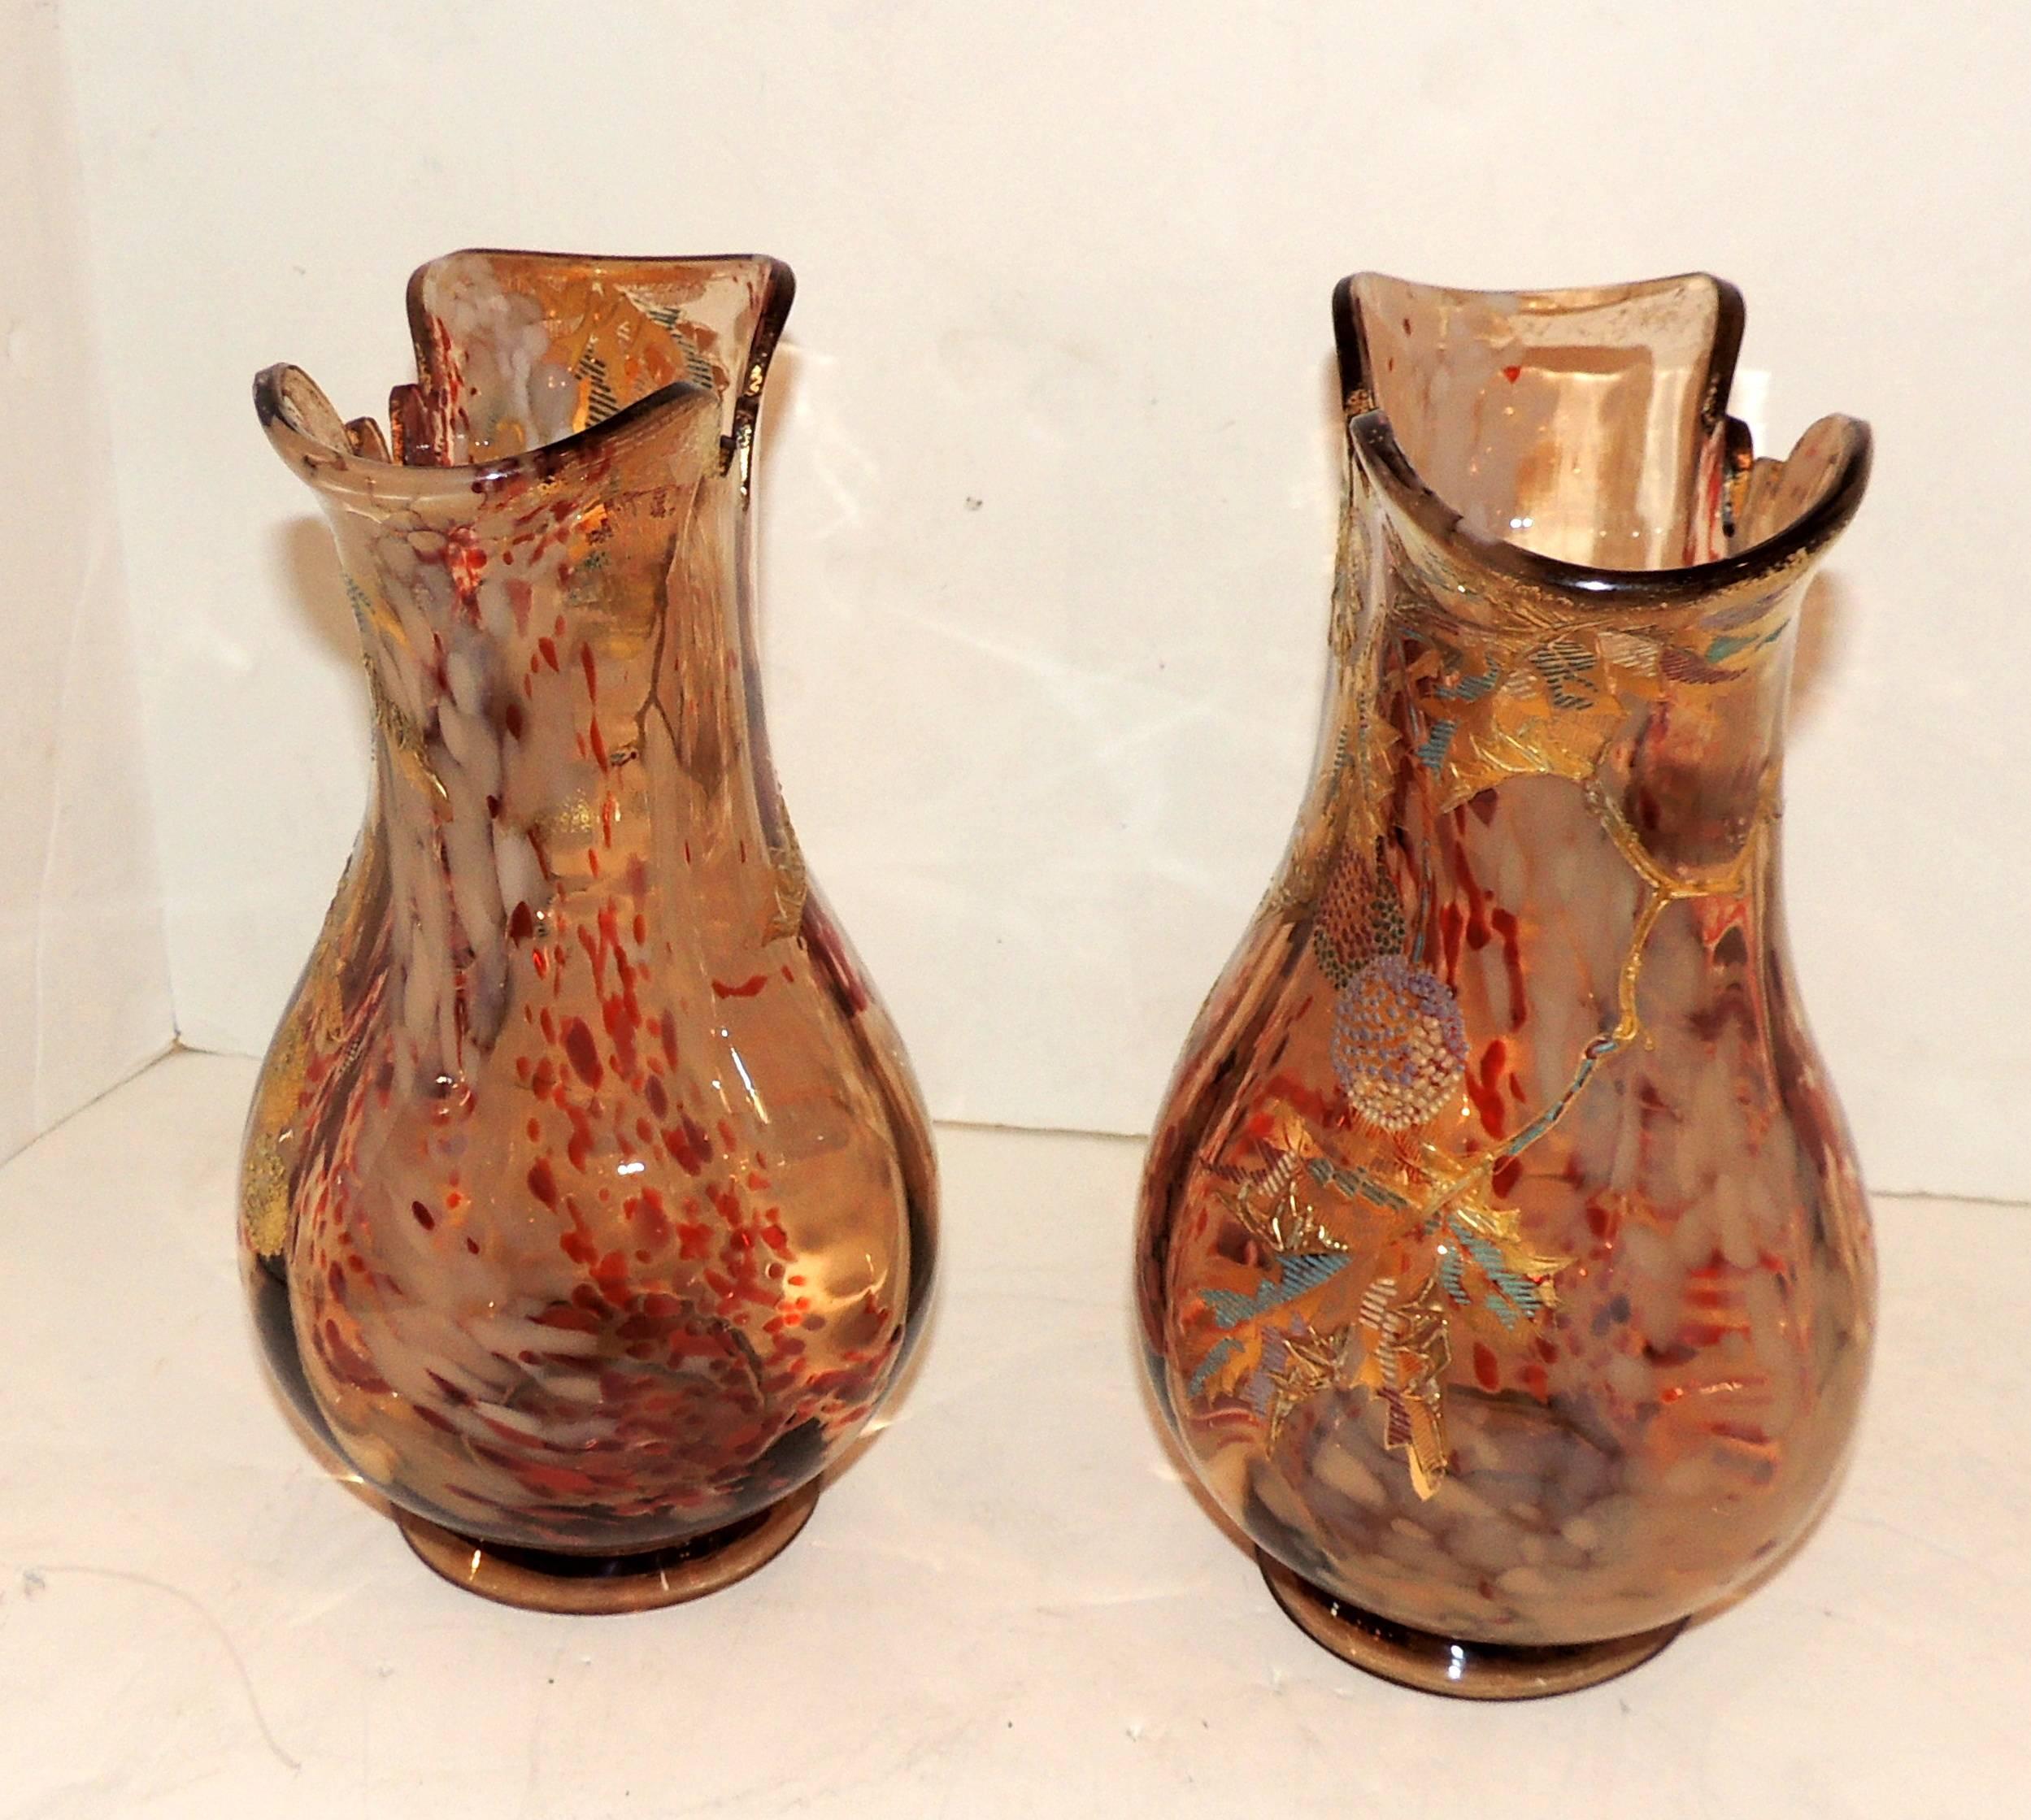 Wonderful Pair Moser Vases Fine Quality Art Glass Art Nouveau Deco Gilt Enamel In Good Condition For Sale In Roslyn, NY